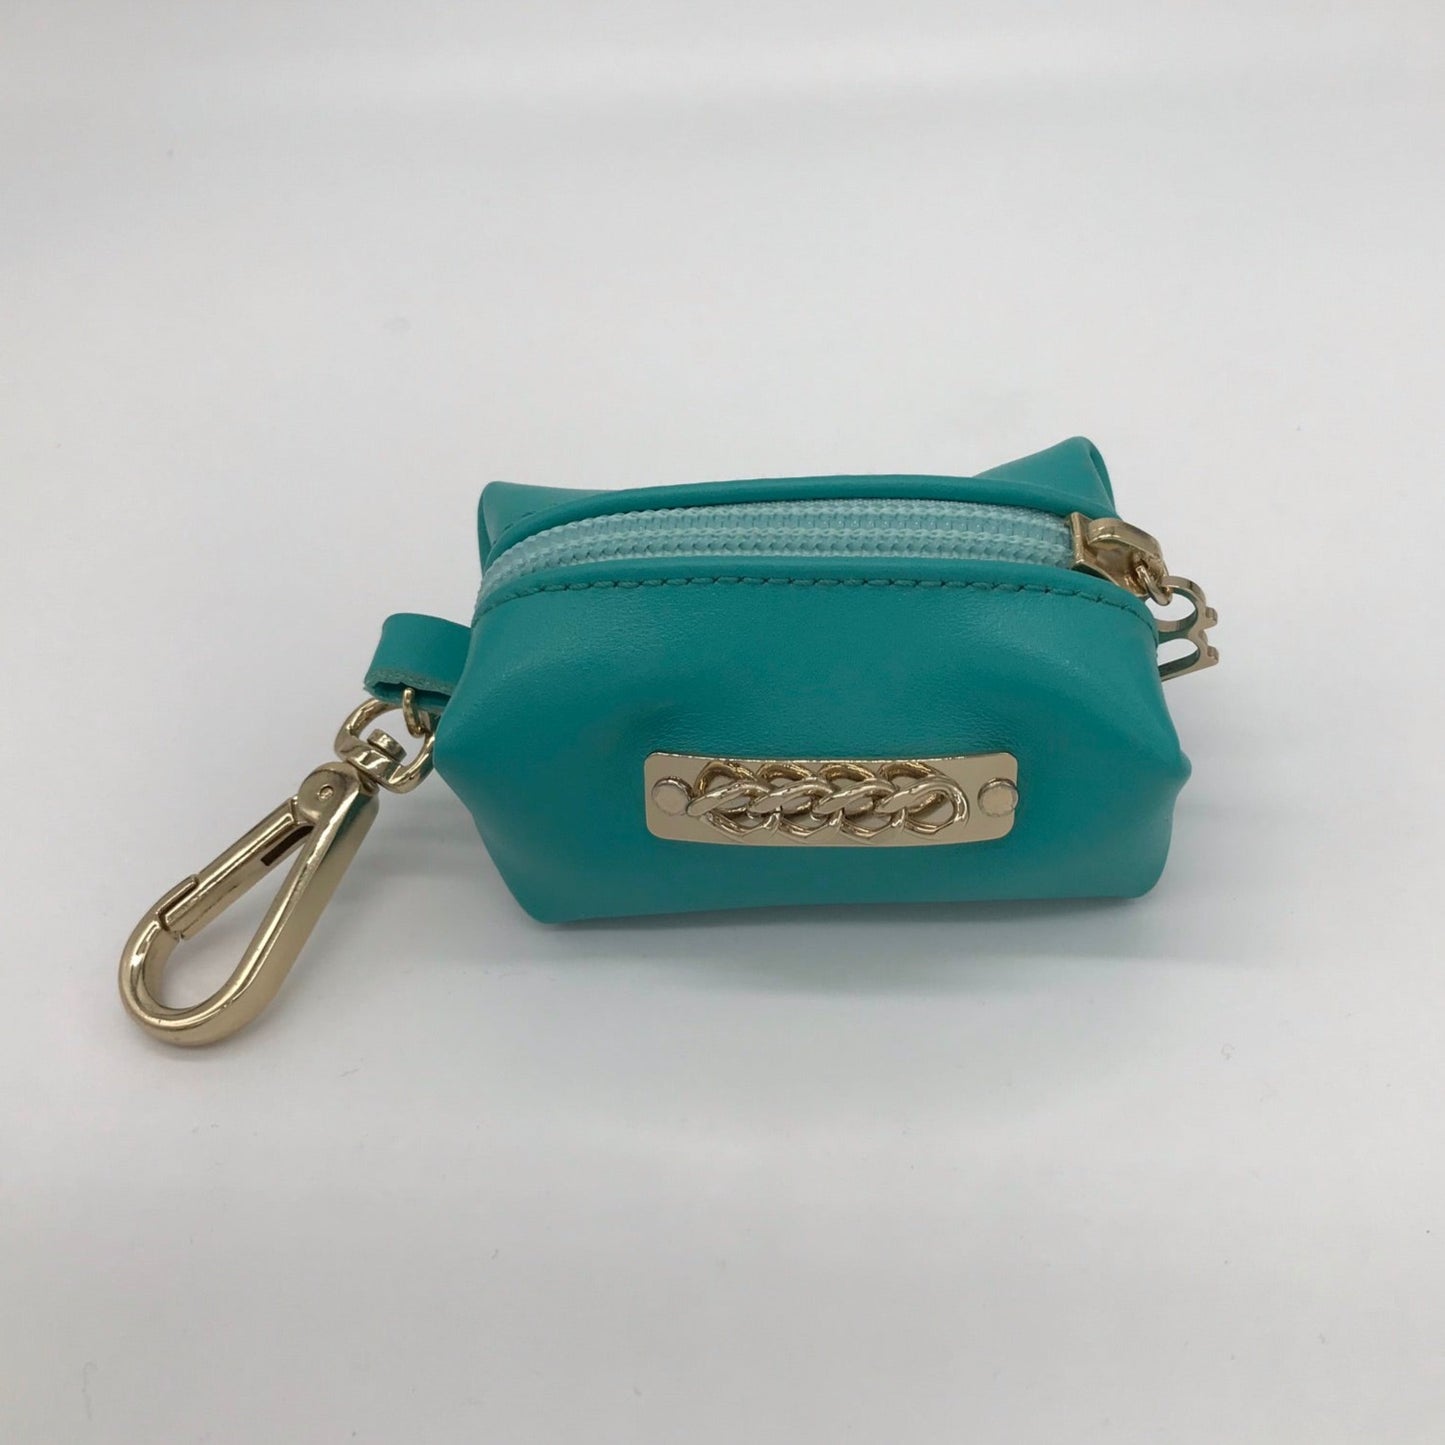 Tiffany leather pouch holder with gold chain